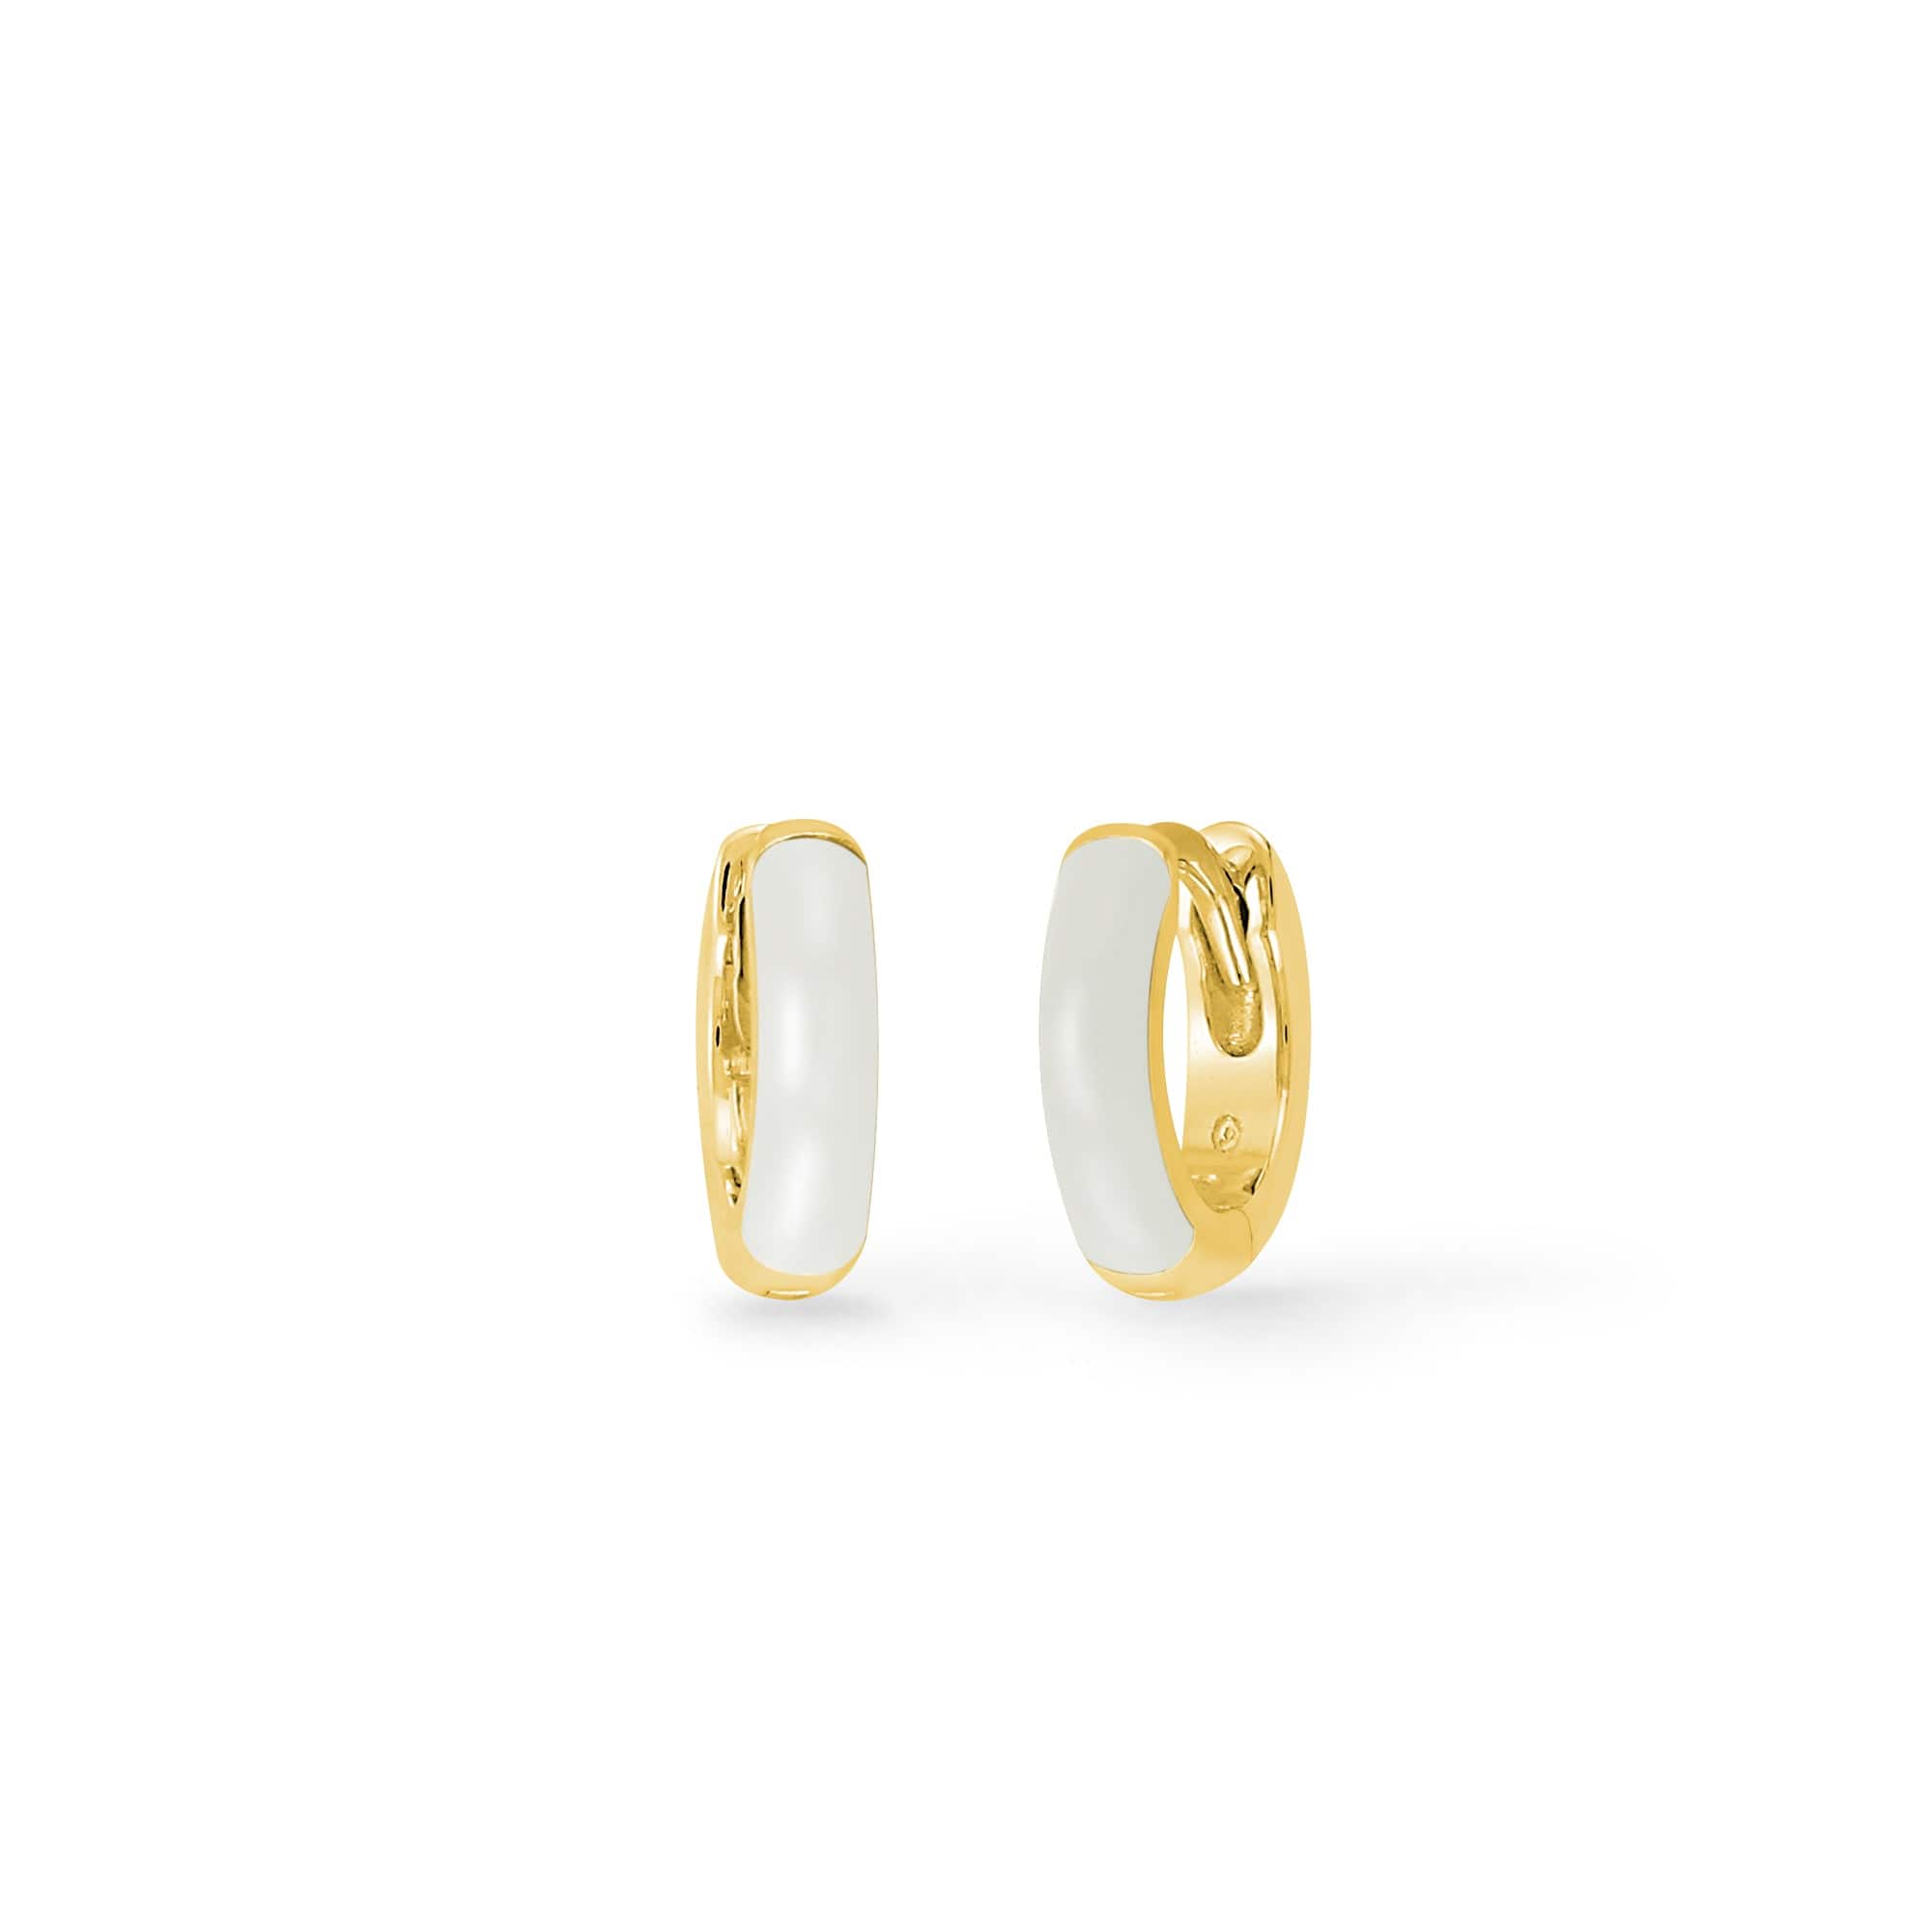 Boma Jewelry Earrings White / 14k Gold Plated Mini Huggie Hoops with Color